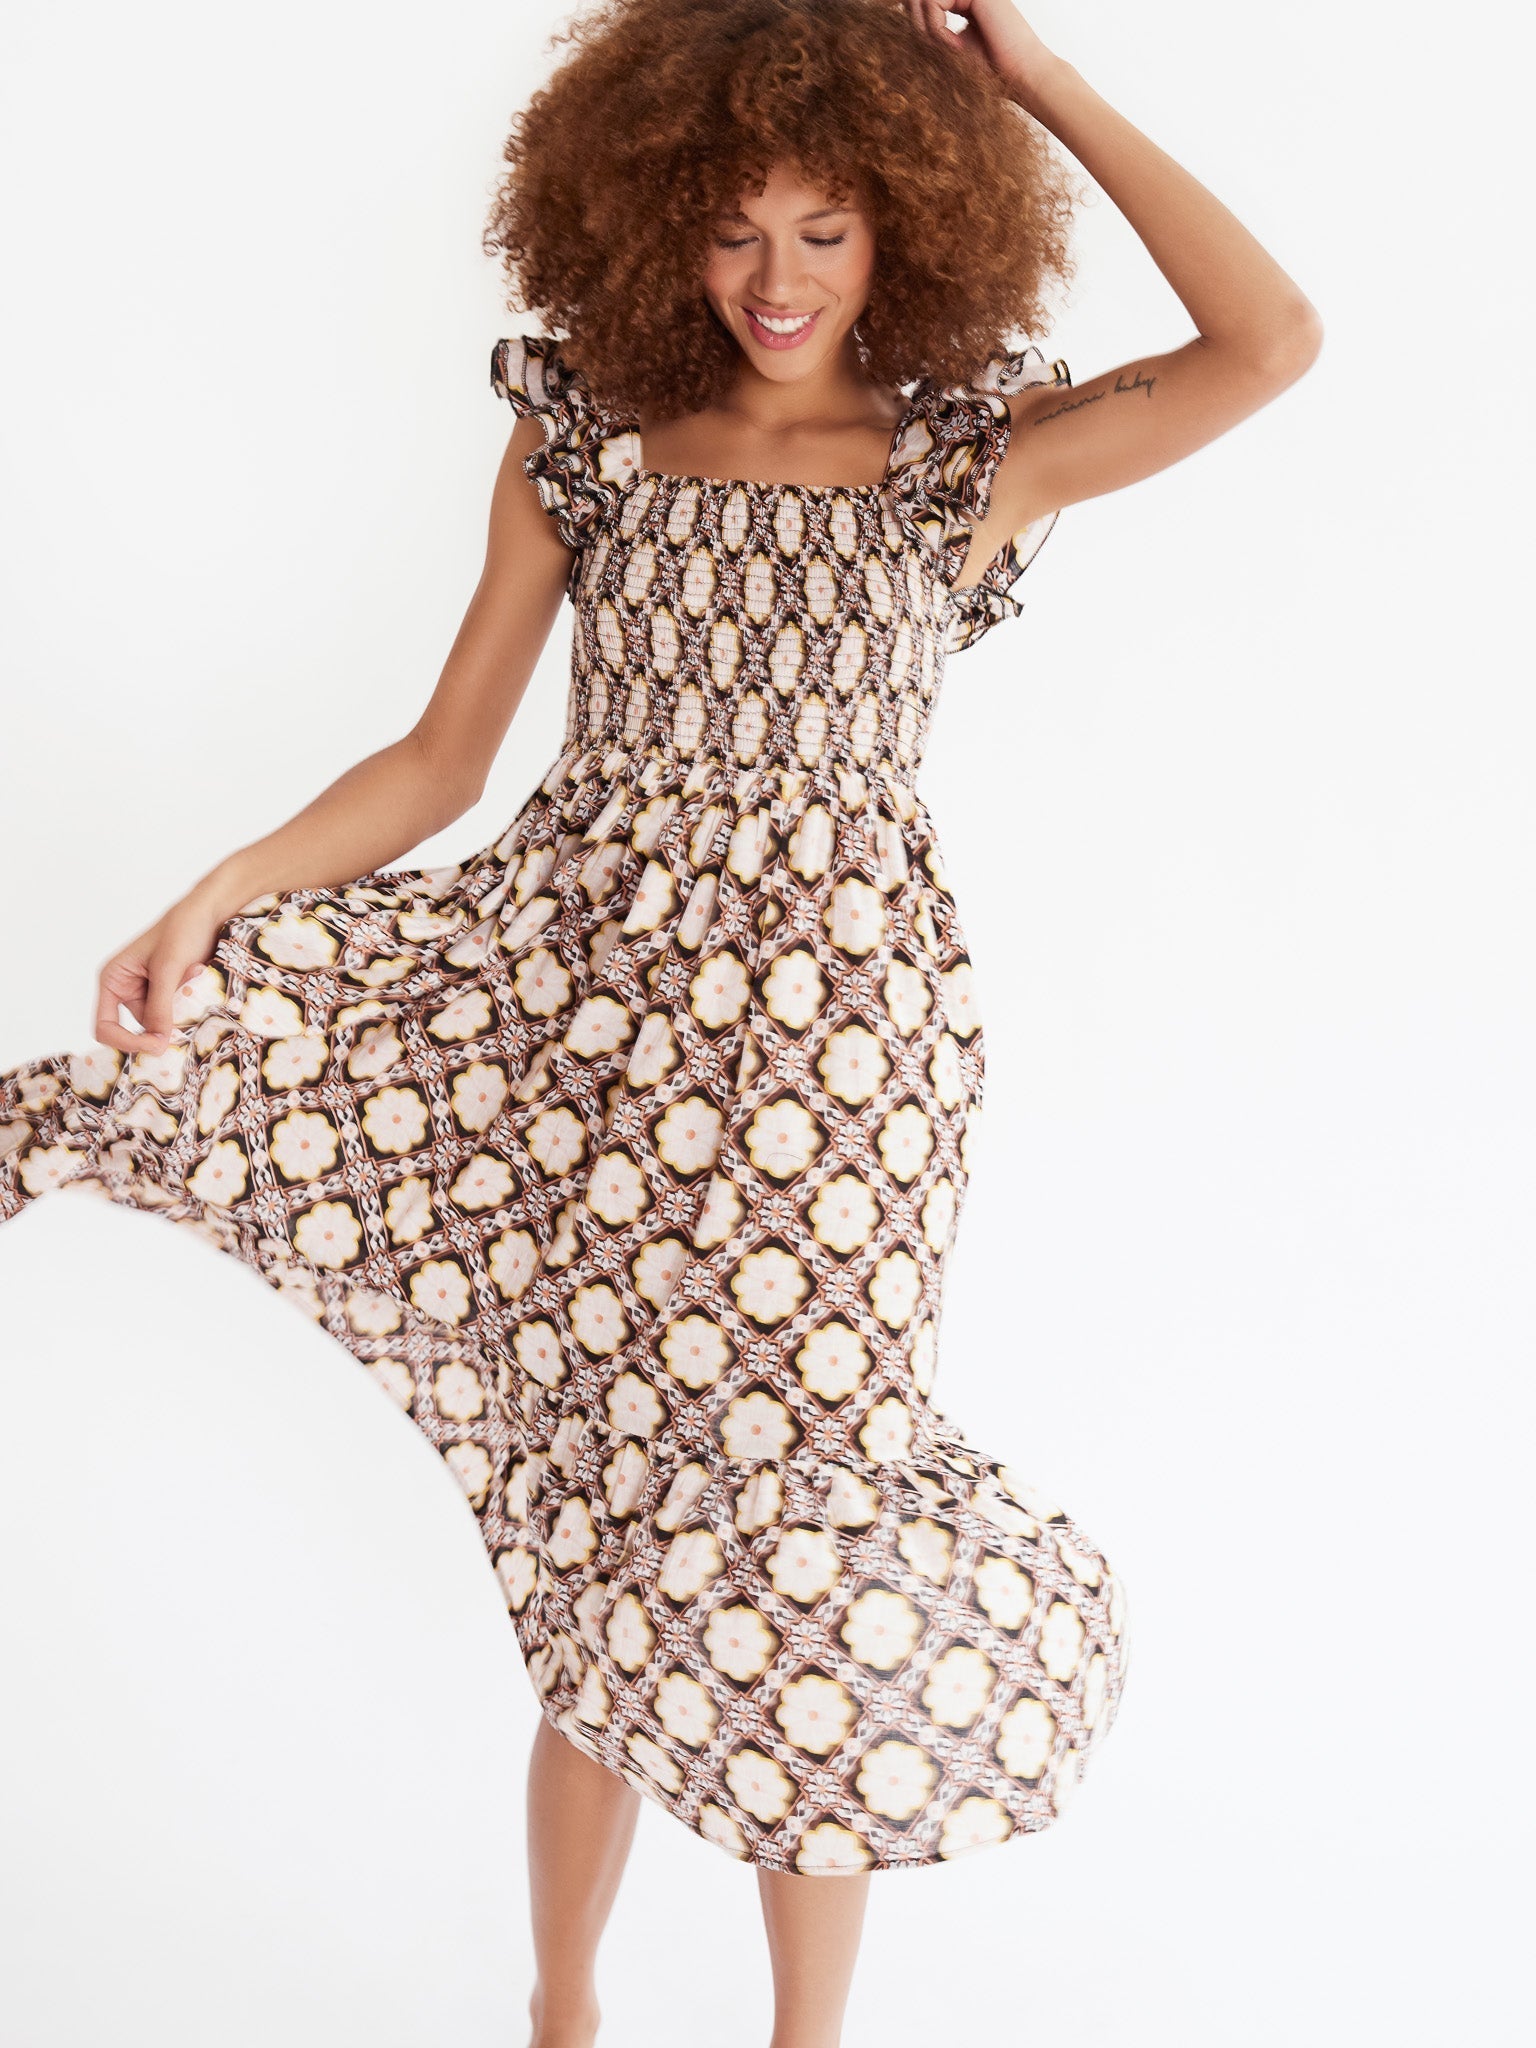 MILLE Clothing Olympia Dress in Merida